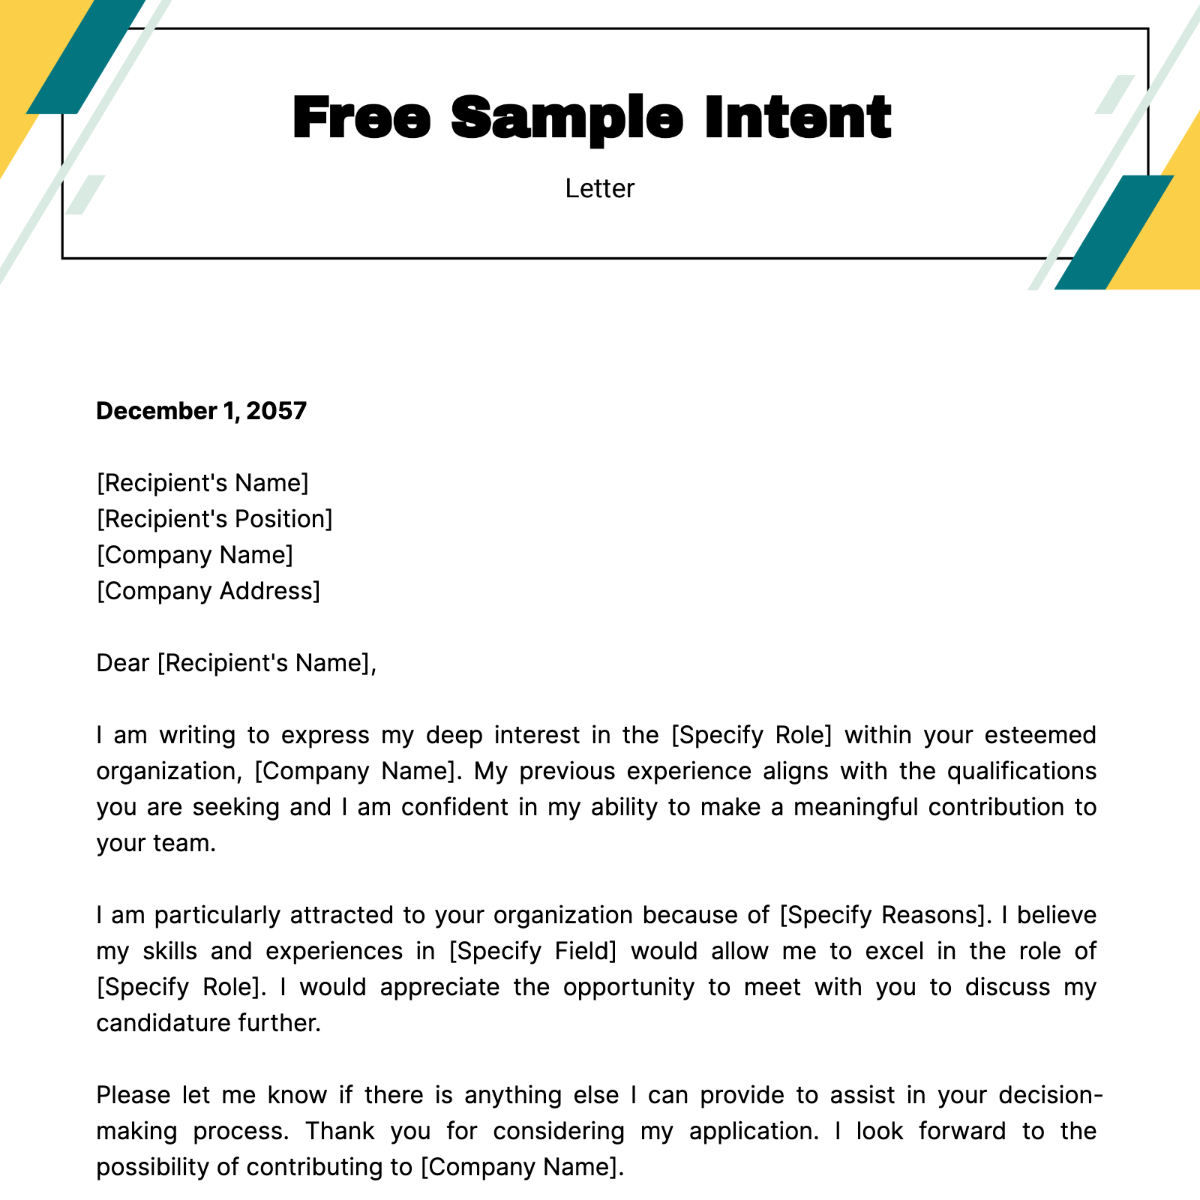 Sample Intent Letter Template